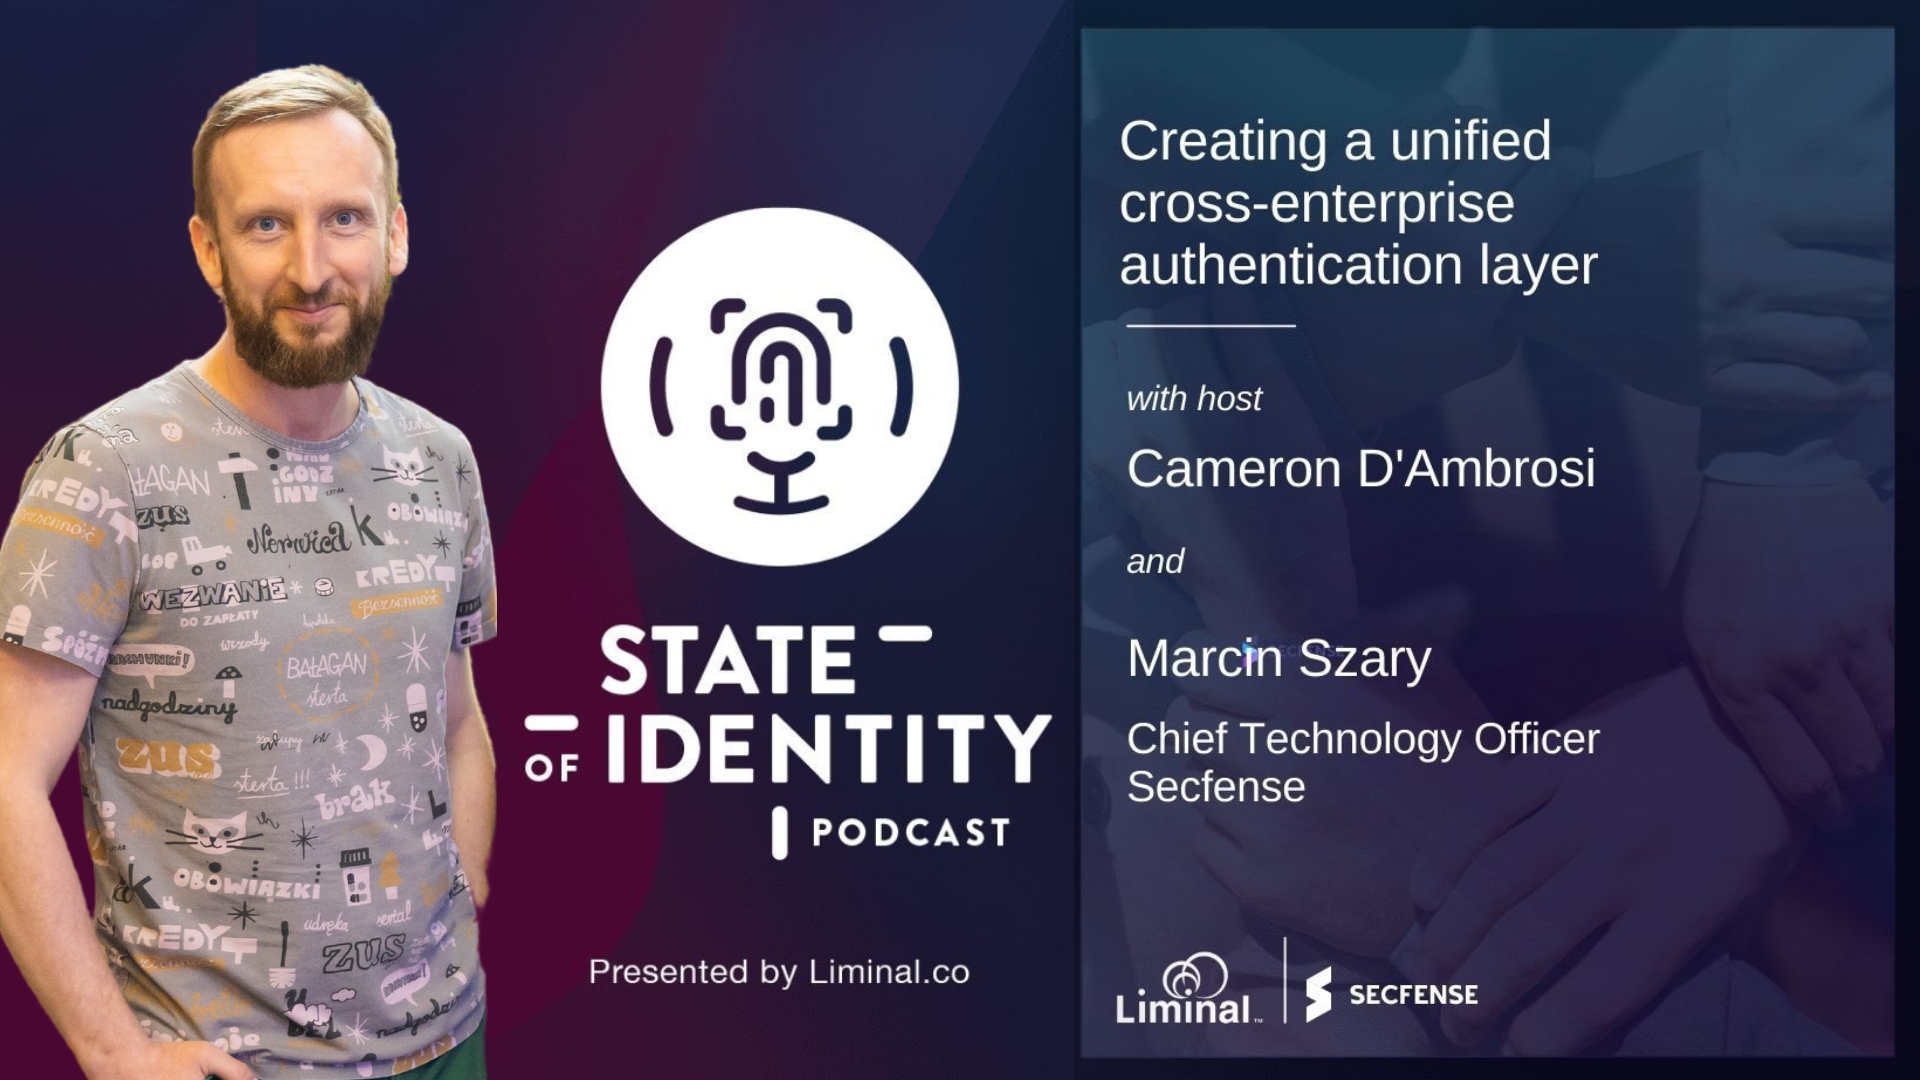 Marcin Szary at State of Identity Podcast by Liminal